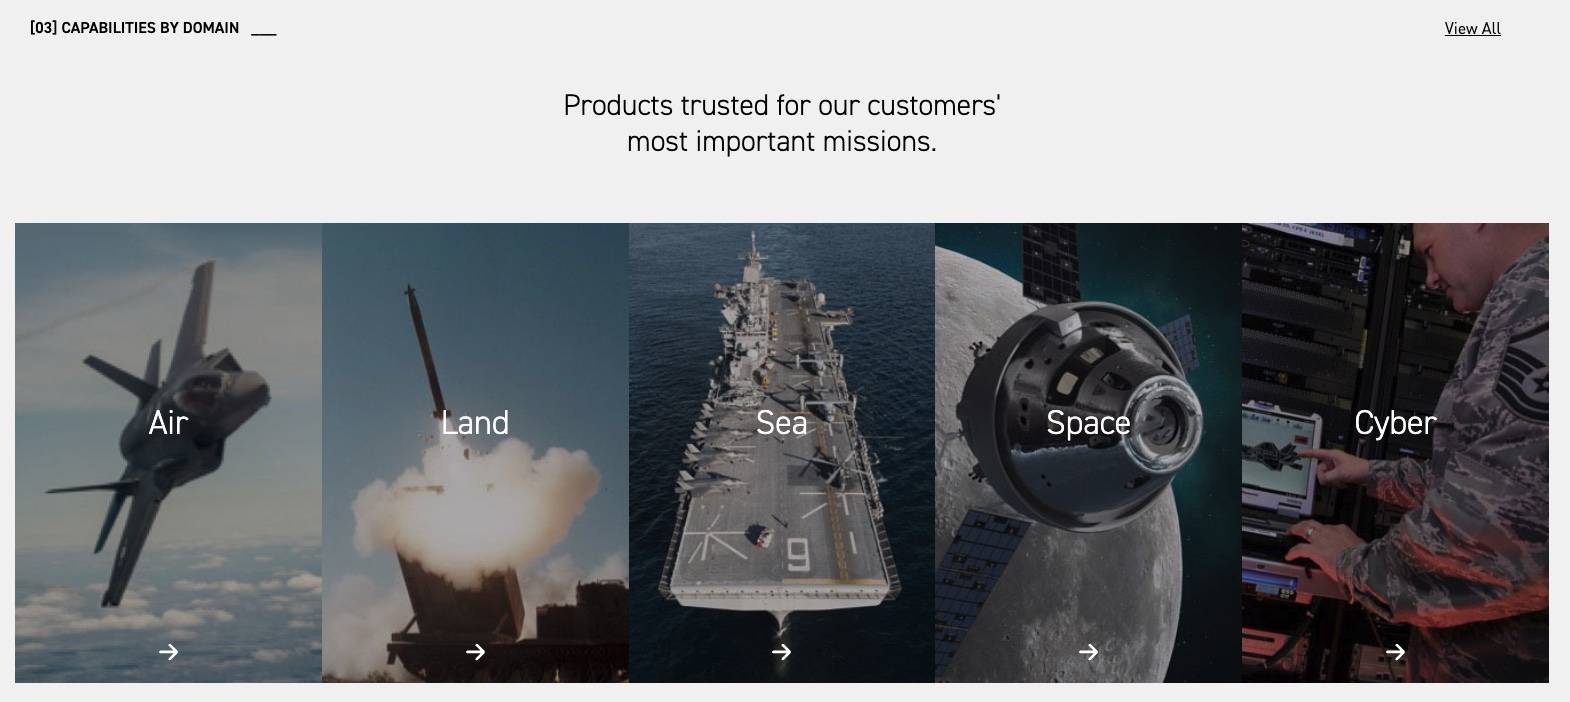 high quality imagery for land air sea space and cyber, used as navigation on the Lockheed Martin website